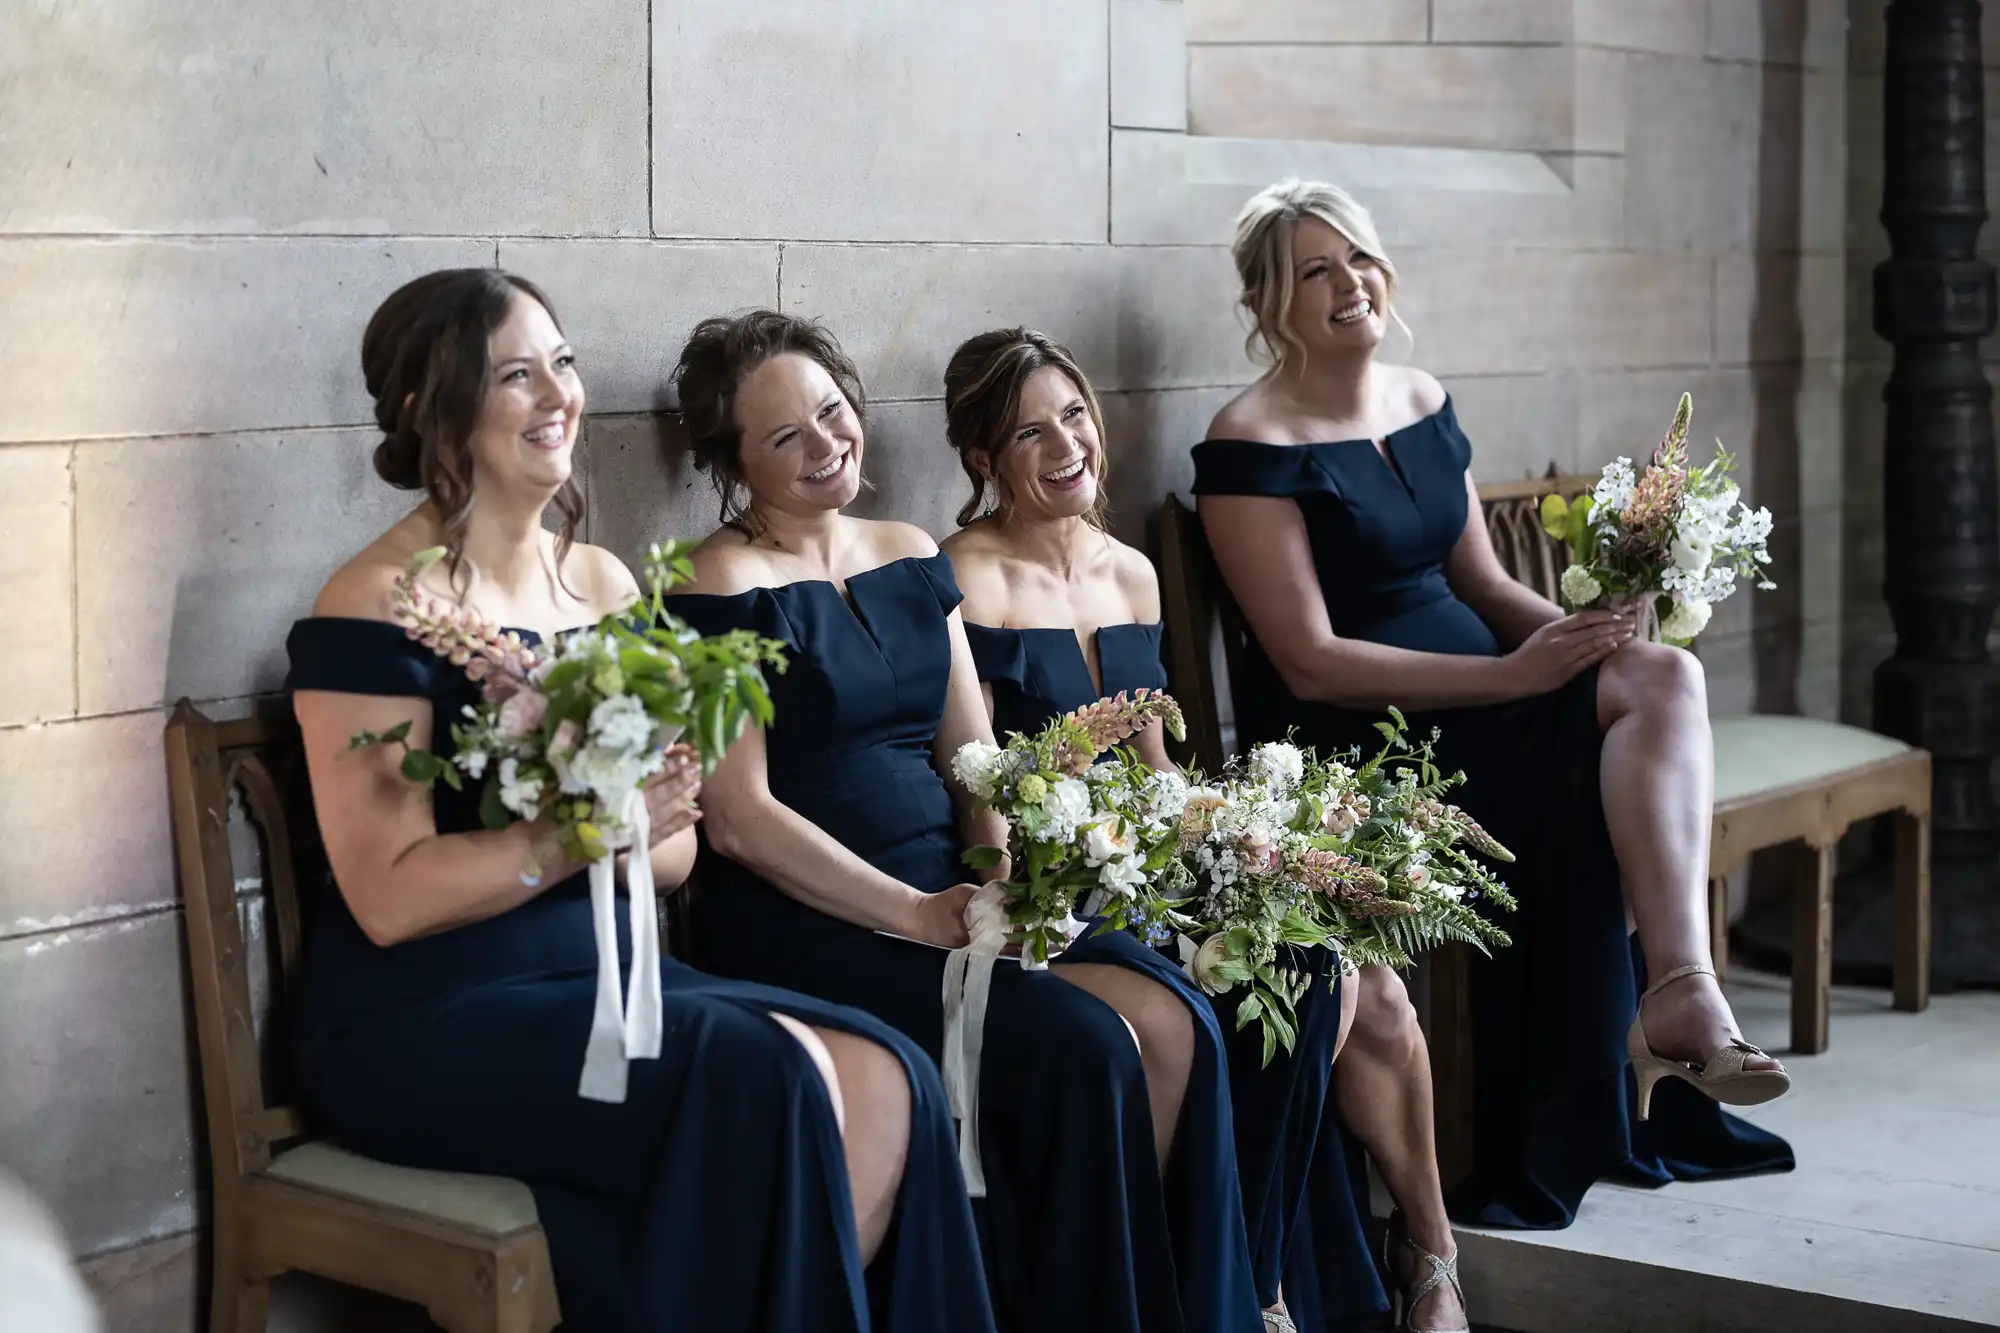 Four women in navy blue dresses sitting side by side, smiling and holding bouquets, in a grand stone hall.